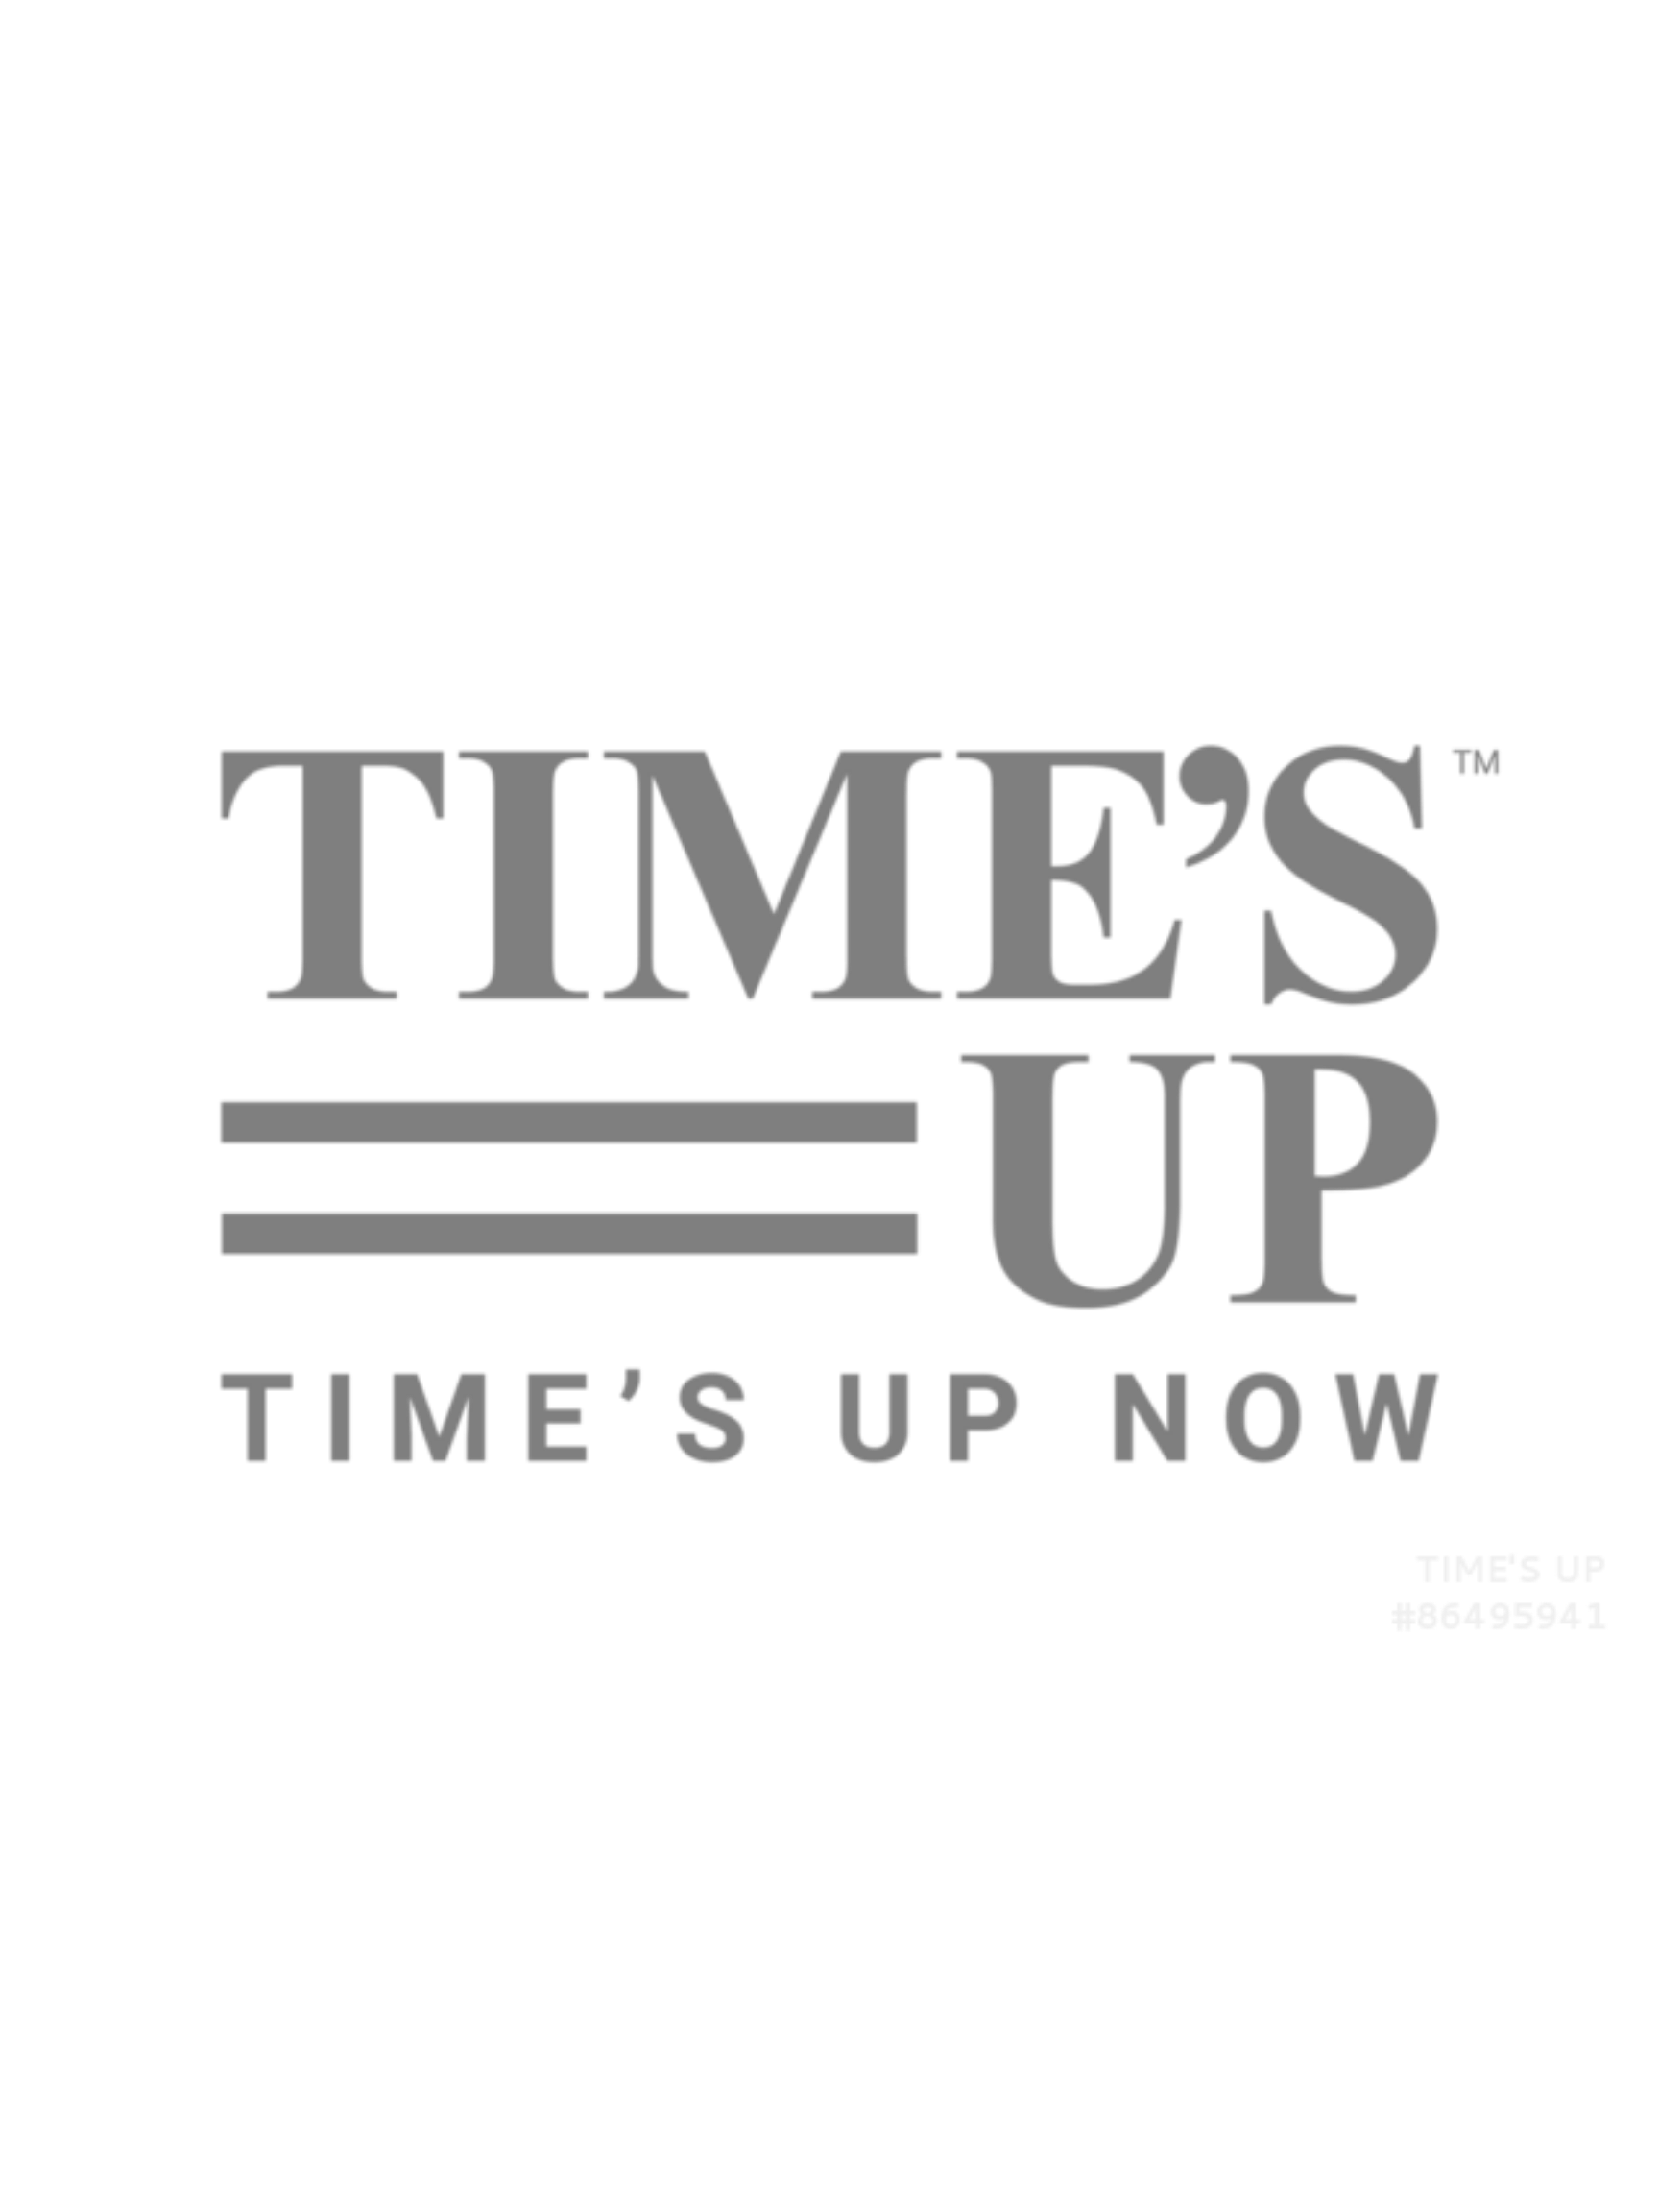 TIME's UP